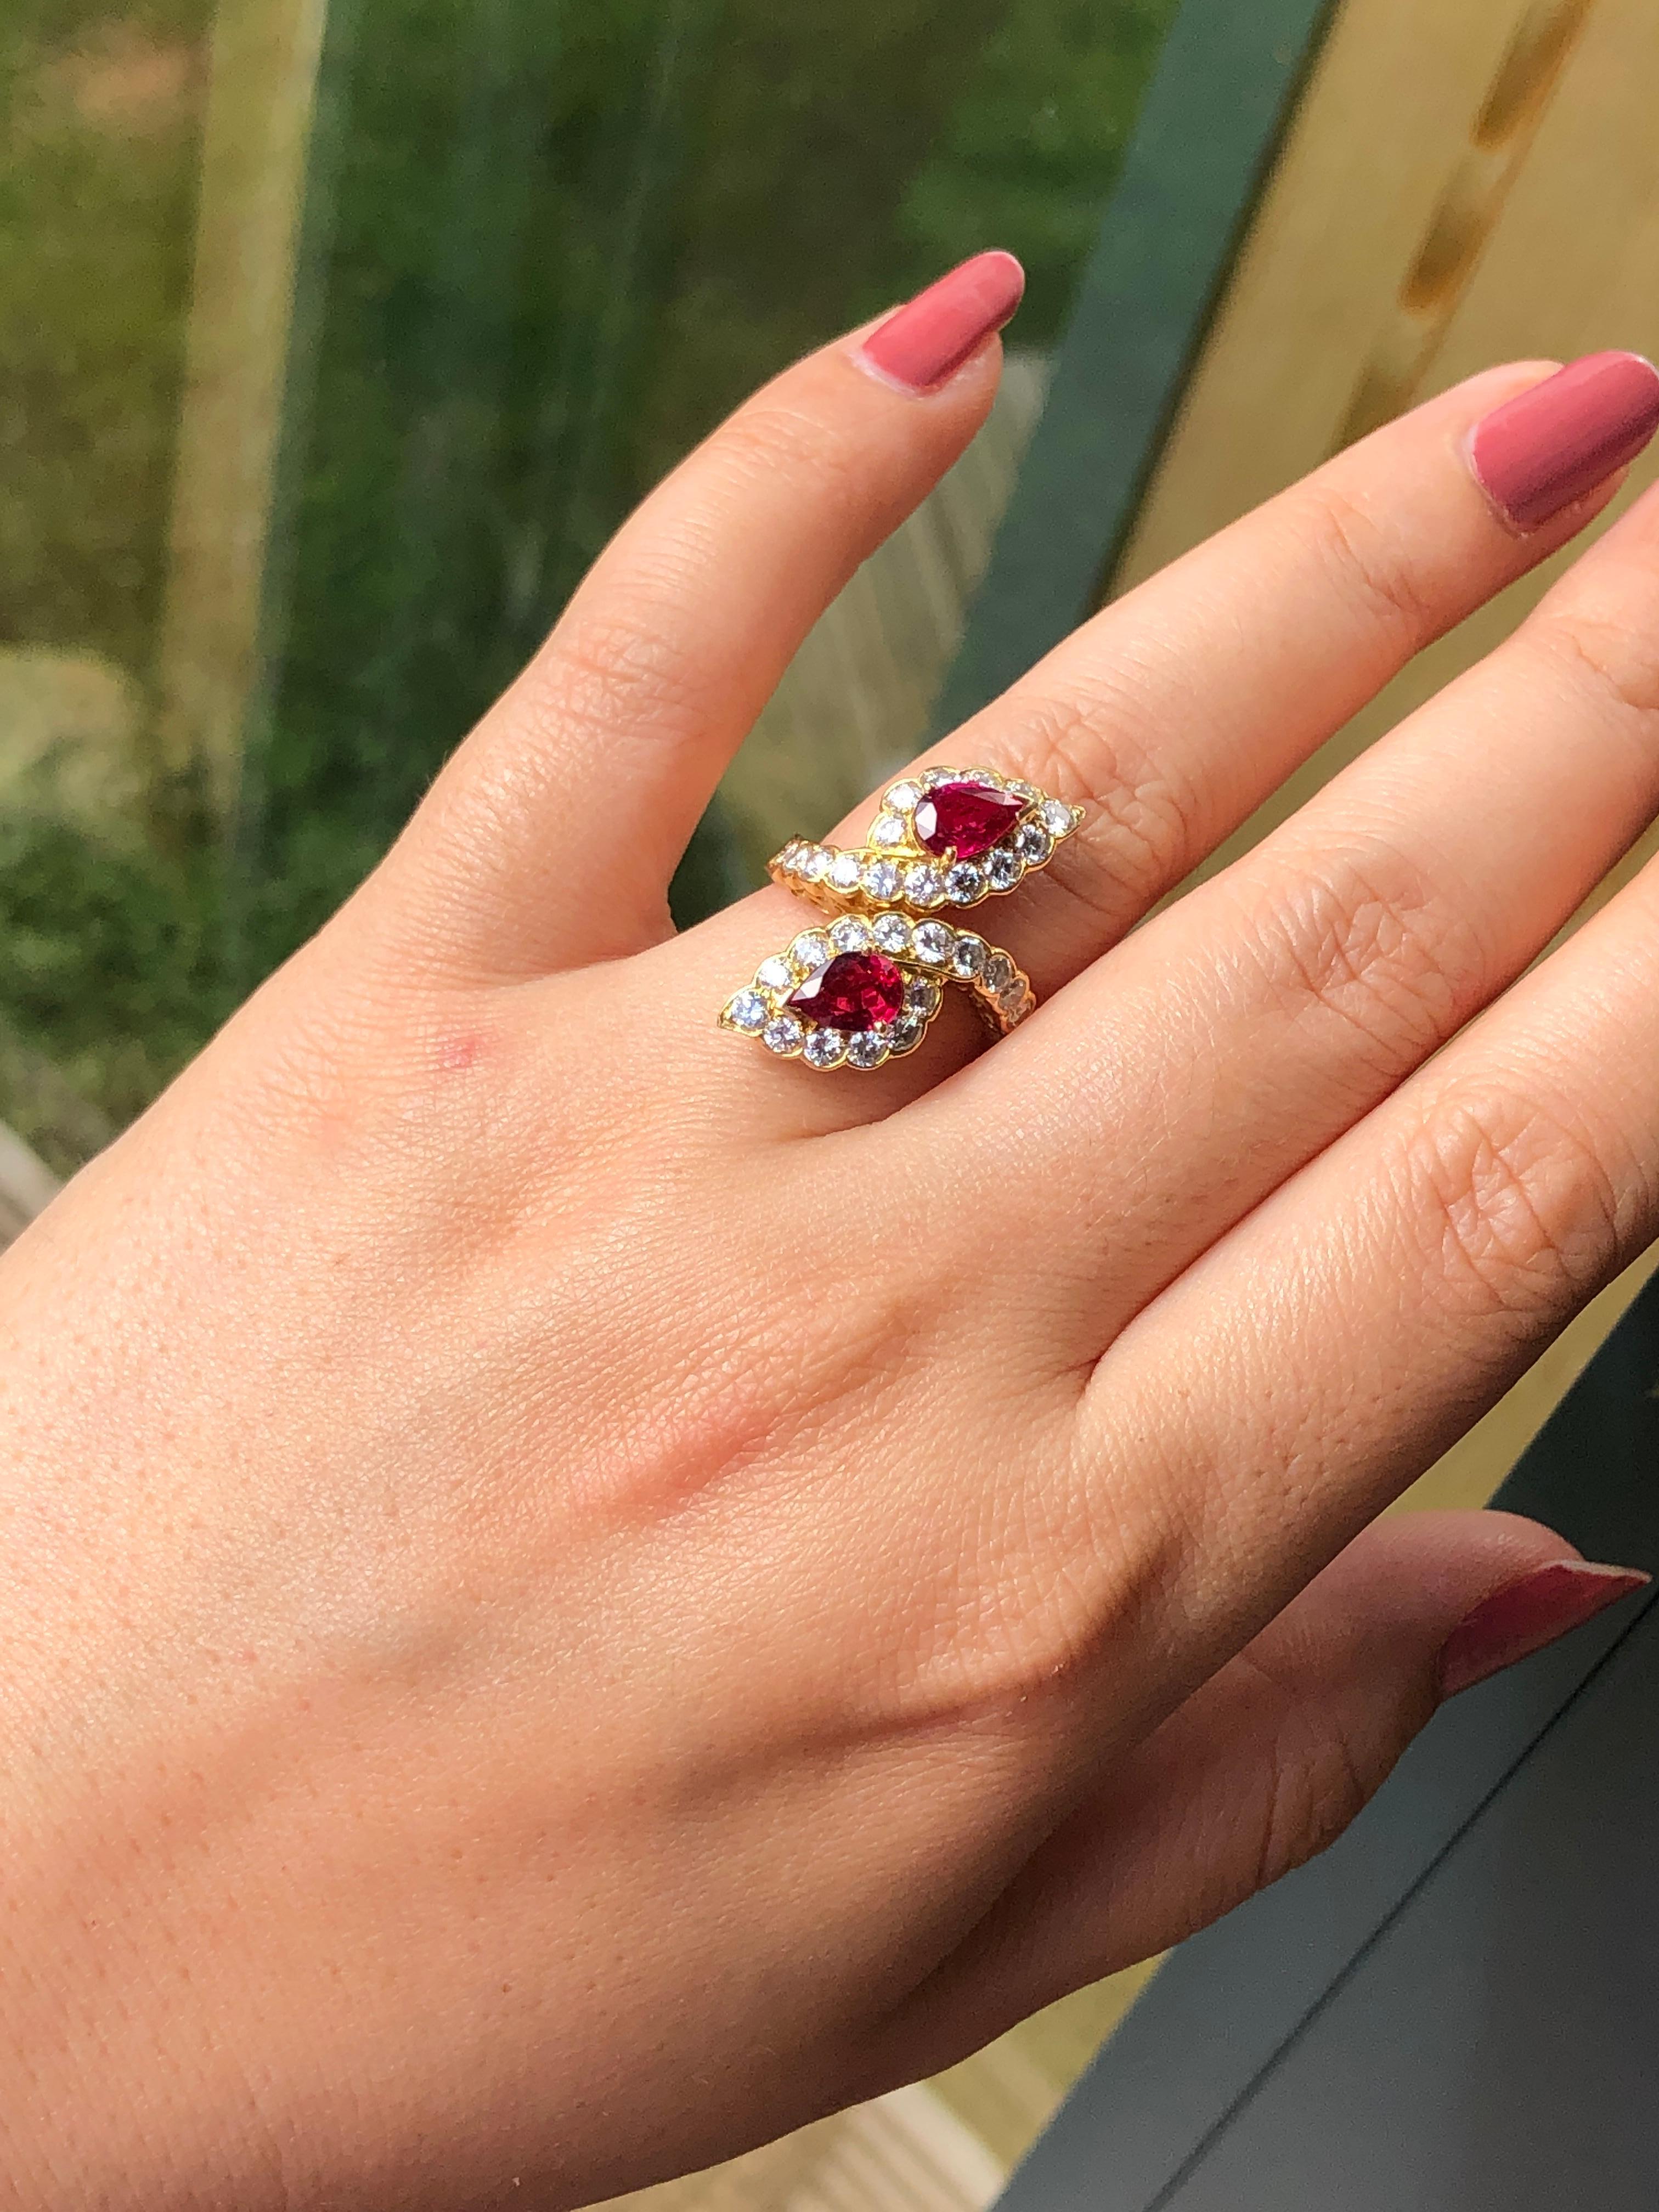 Vintage Van Cleef and Arpels 18 karat yellow gold cluster ring consisting of 2 pear shaped rubies weighing 2.3 carats in total. Very elegant design and so beautiful when you wear it. Signed Van Cleef and Arpels. Perfect condition.

Diamond : 1.2